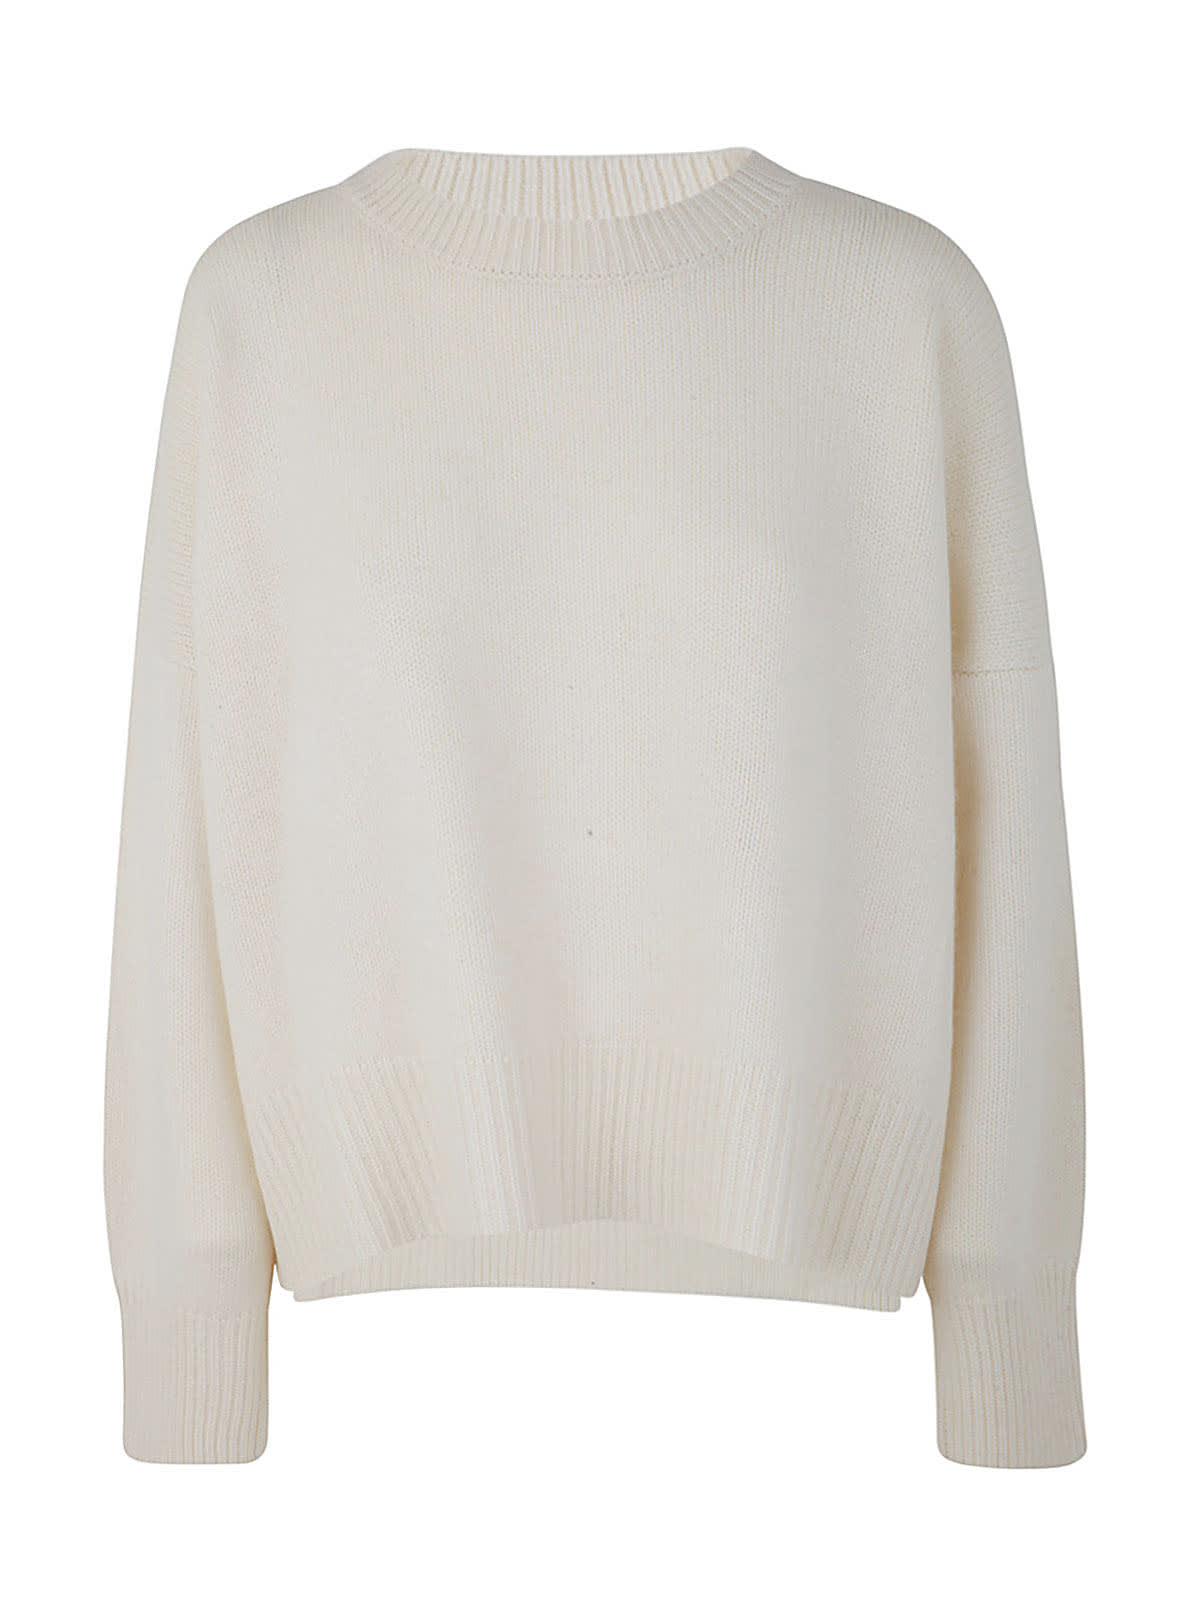 Oyuna Knitted Chunky Boxy Sweater In Ivory